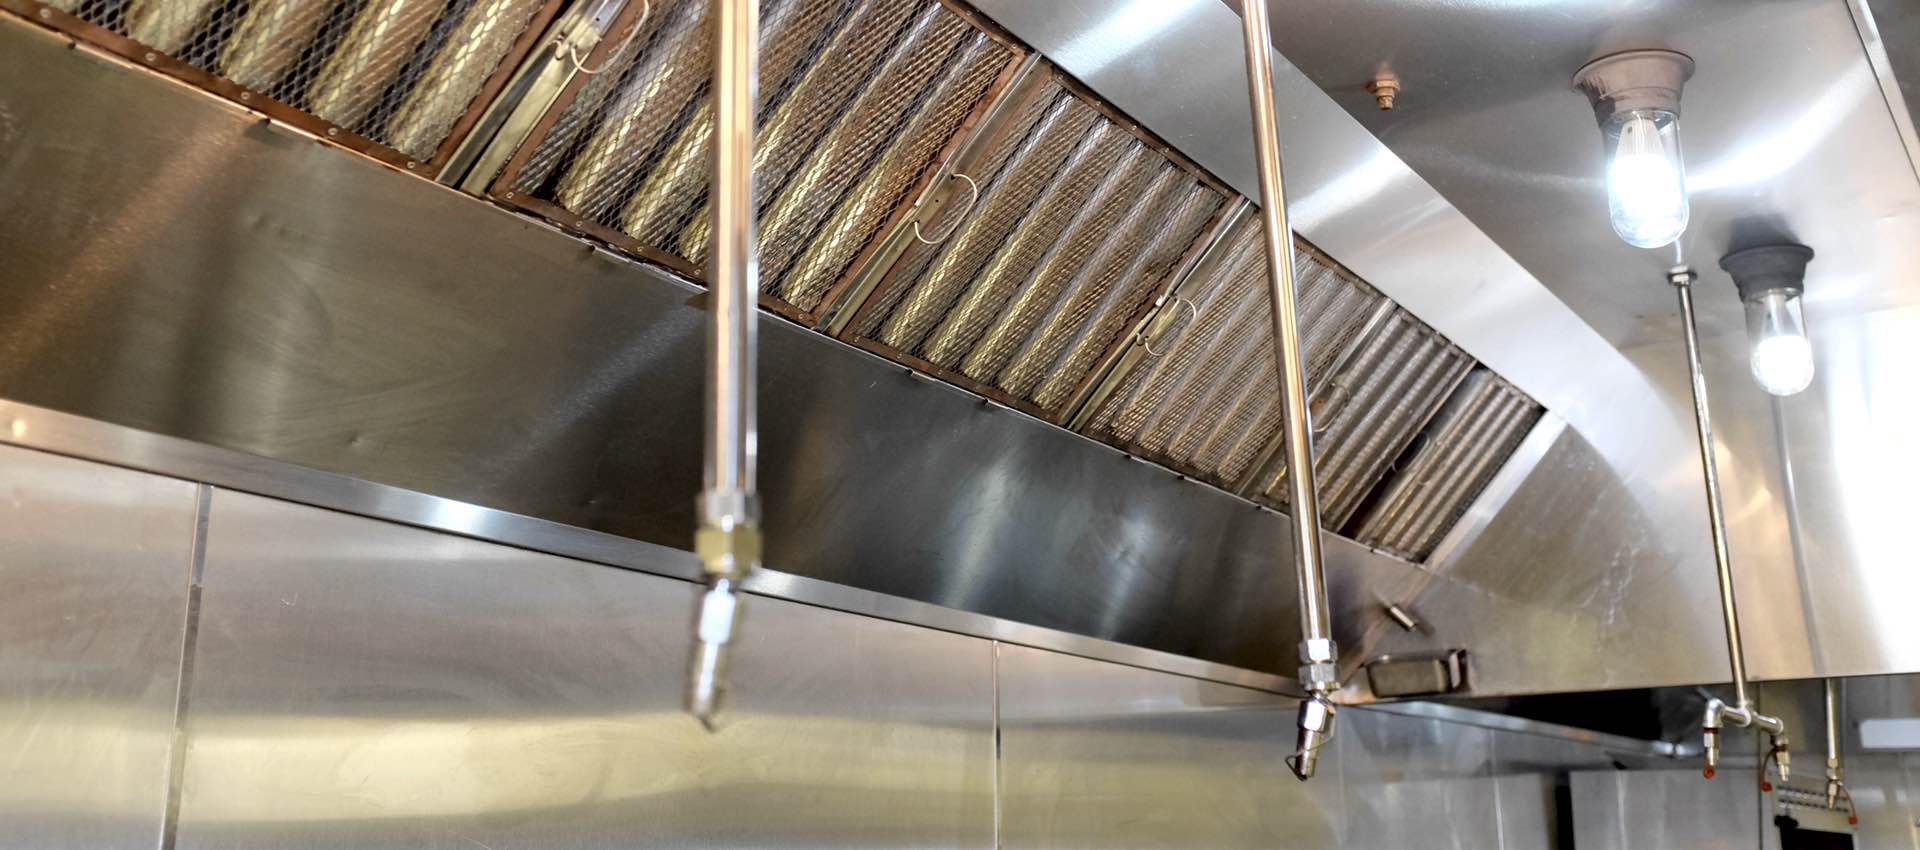 Maintenance Cleaning Schedule Of Commercial Kitchen Extractor Components 